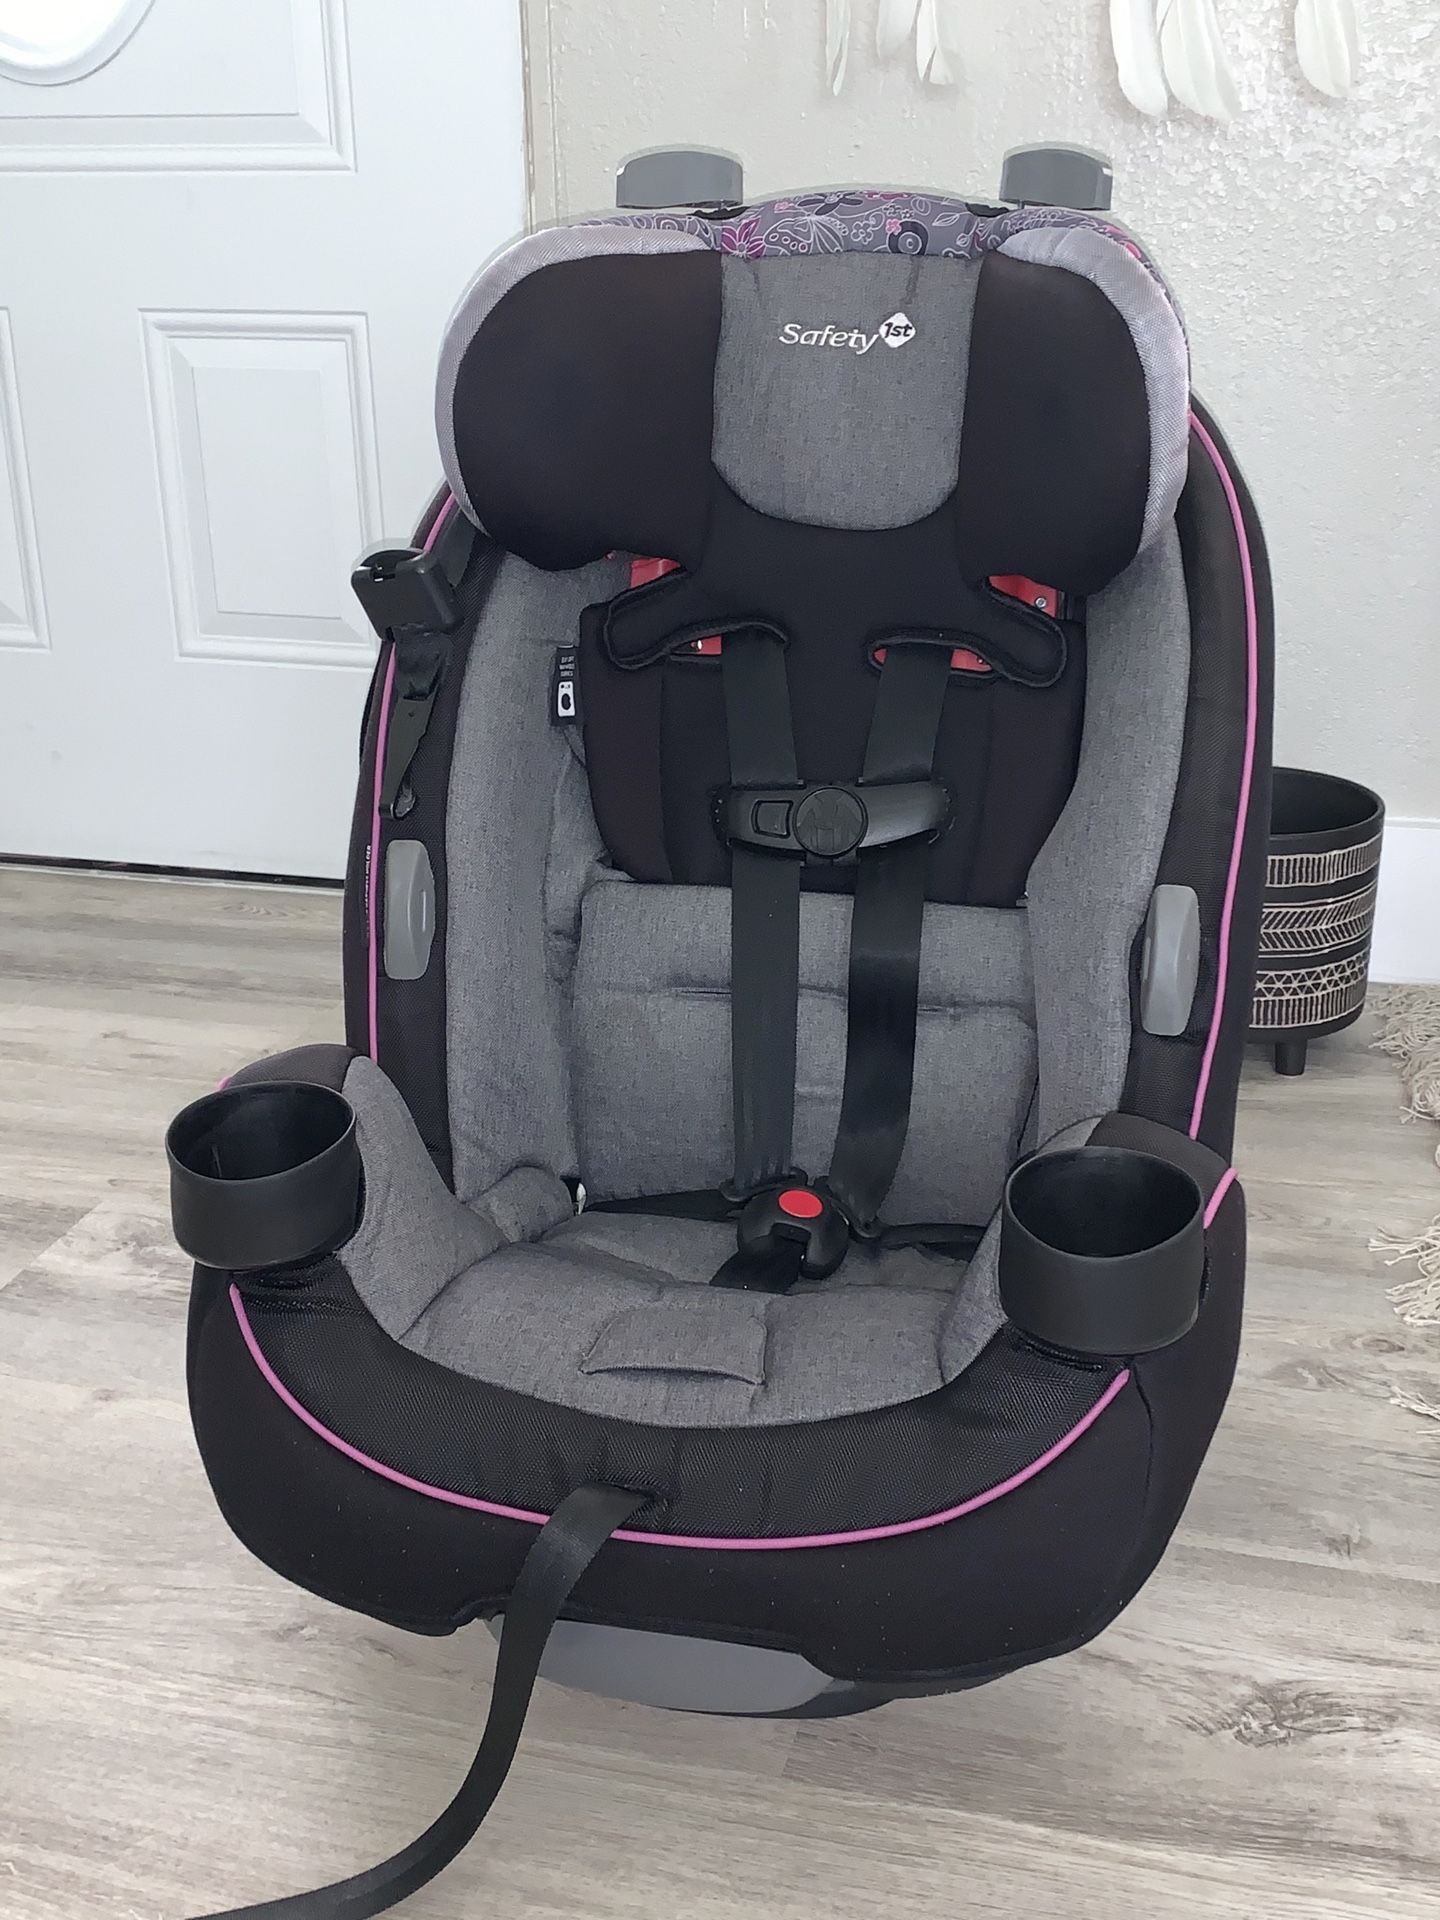 Reclinerable Safety 1st Grow and Go 3-in-1 Car Seat $60 FIRM CASH ONLY